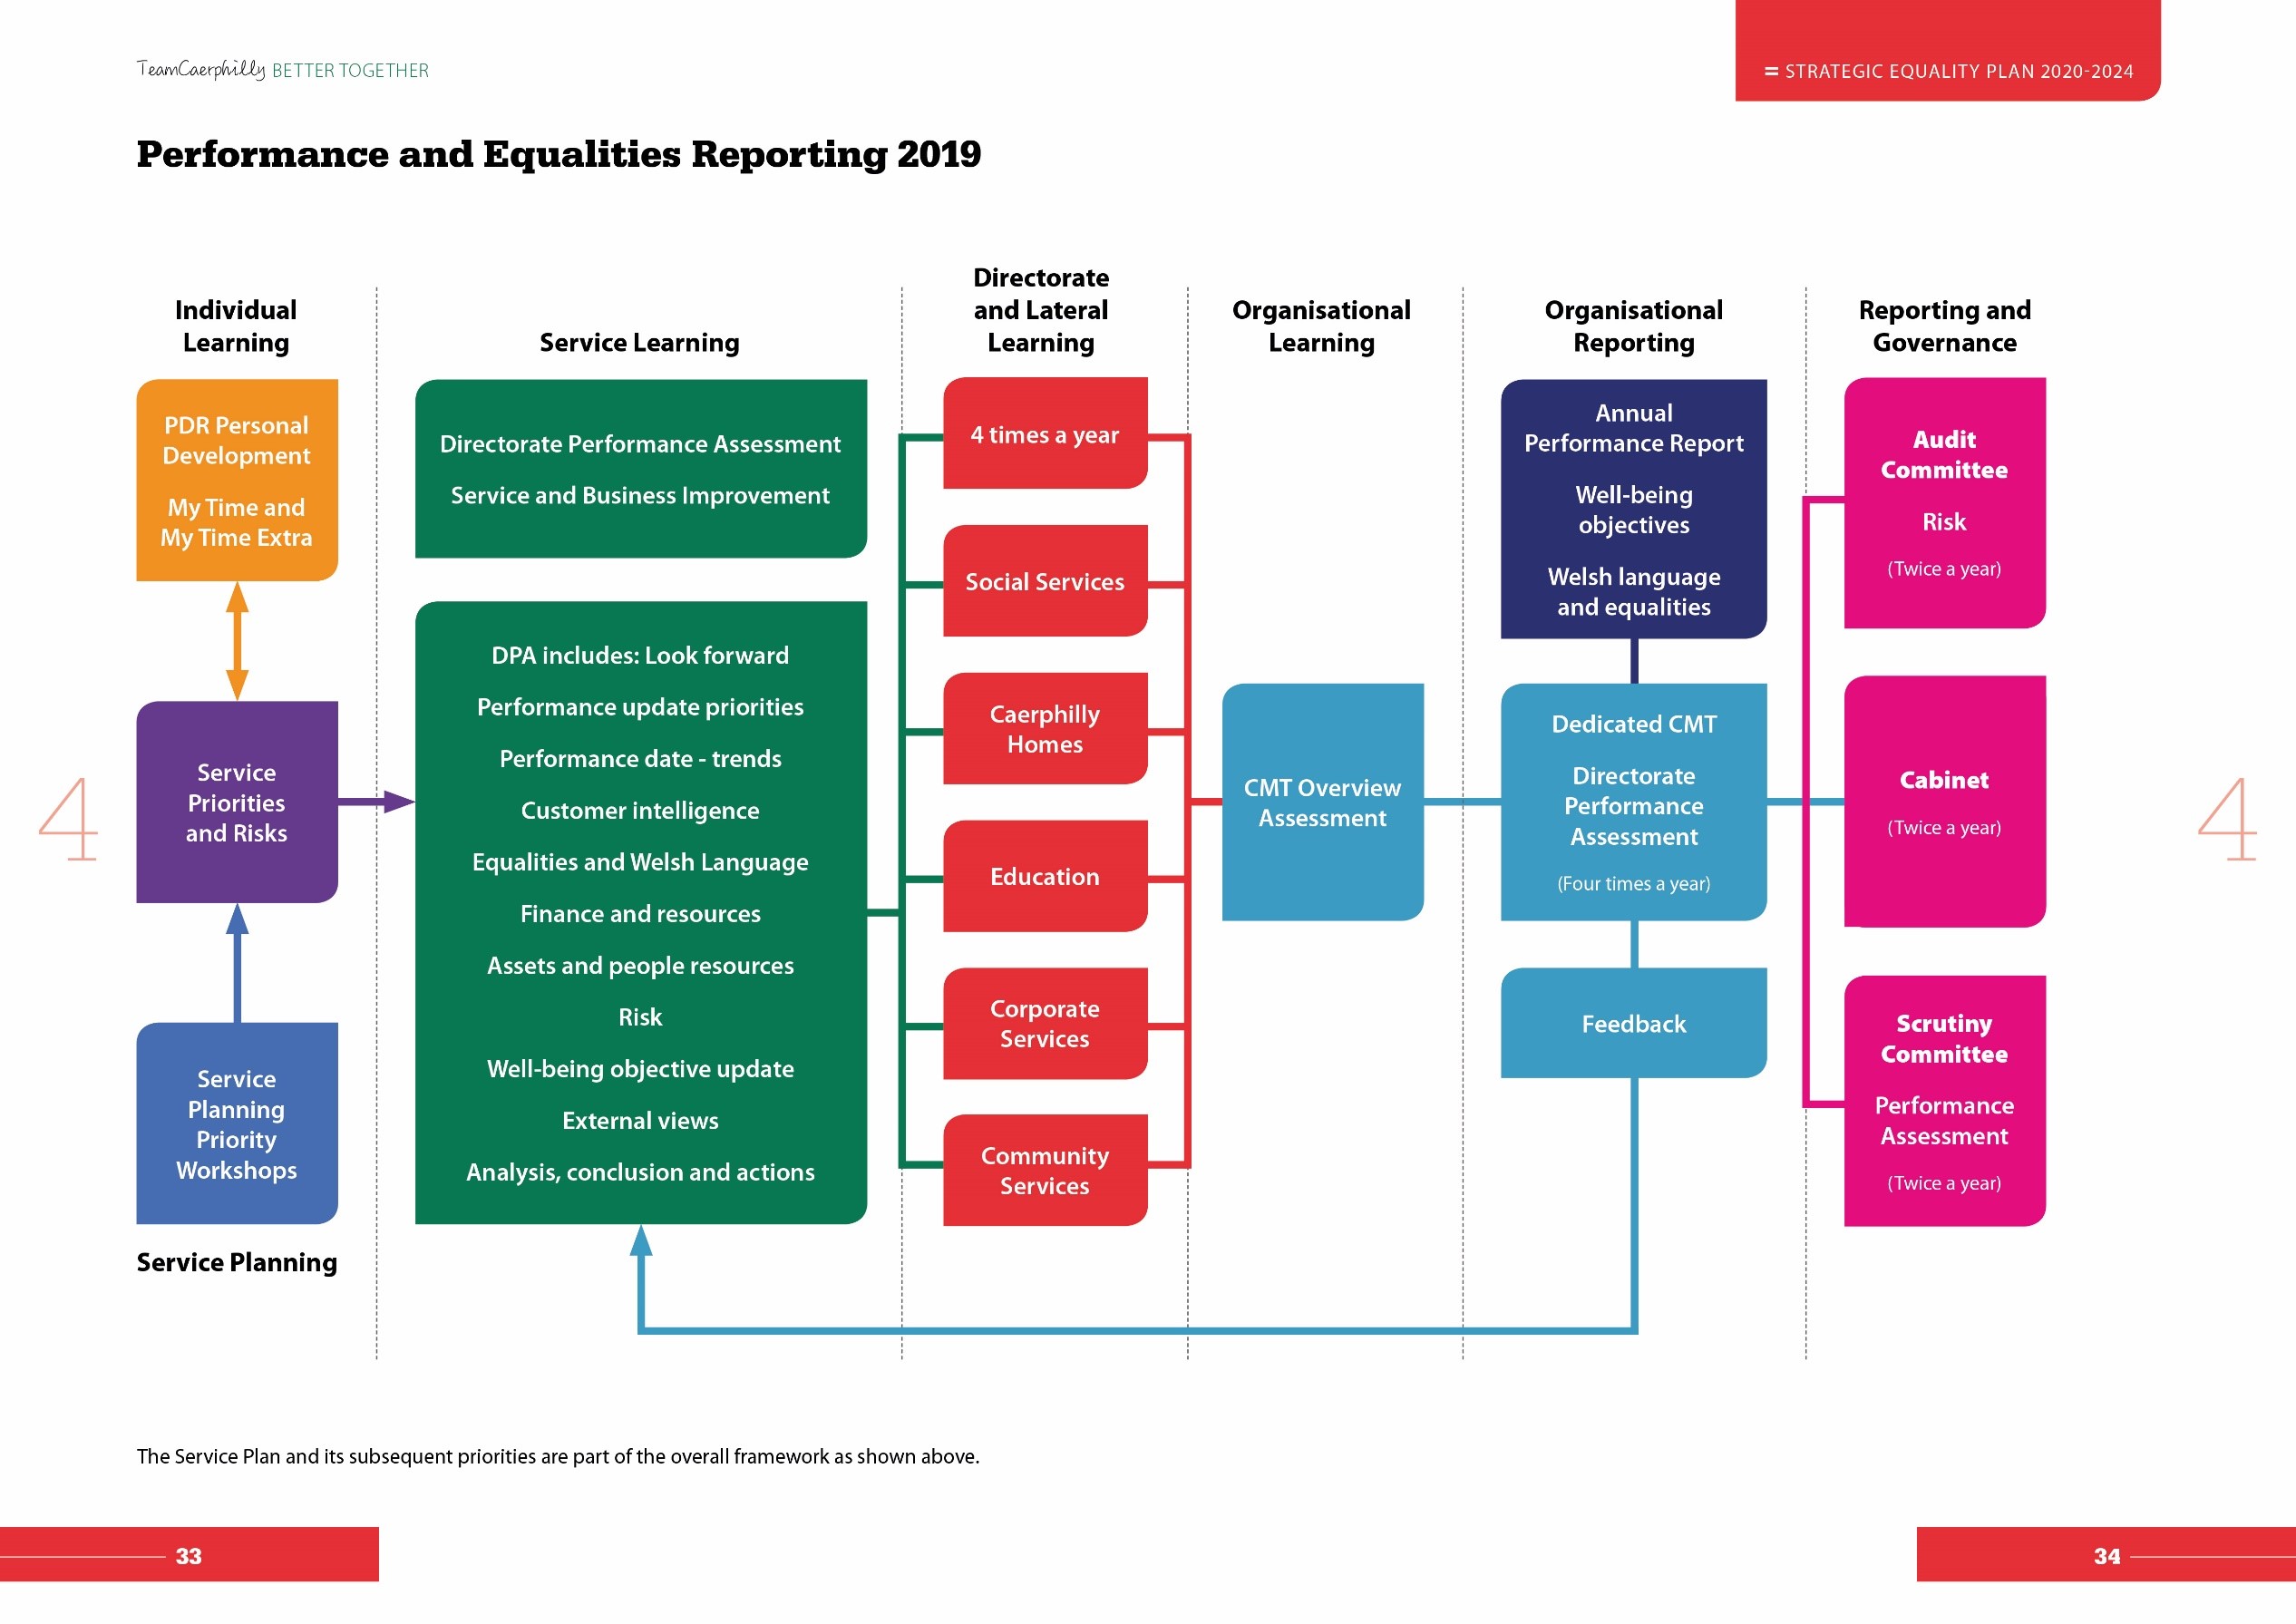 Performance and Equality Reporting 2019 workflow